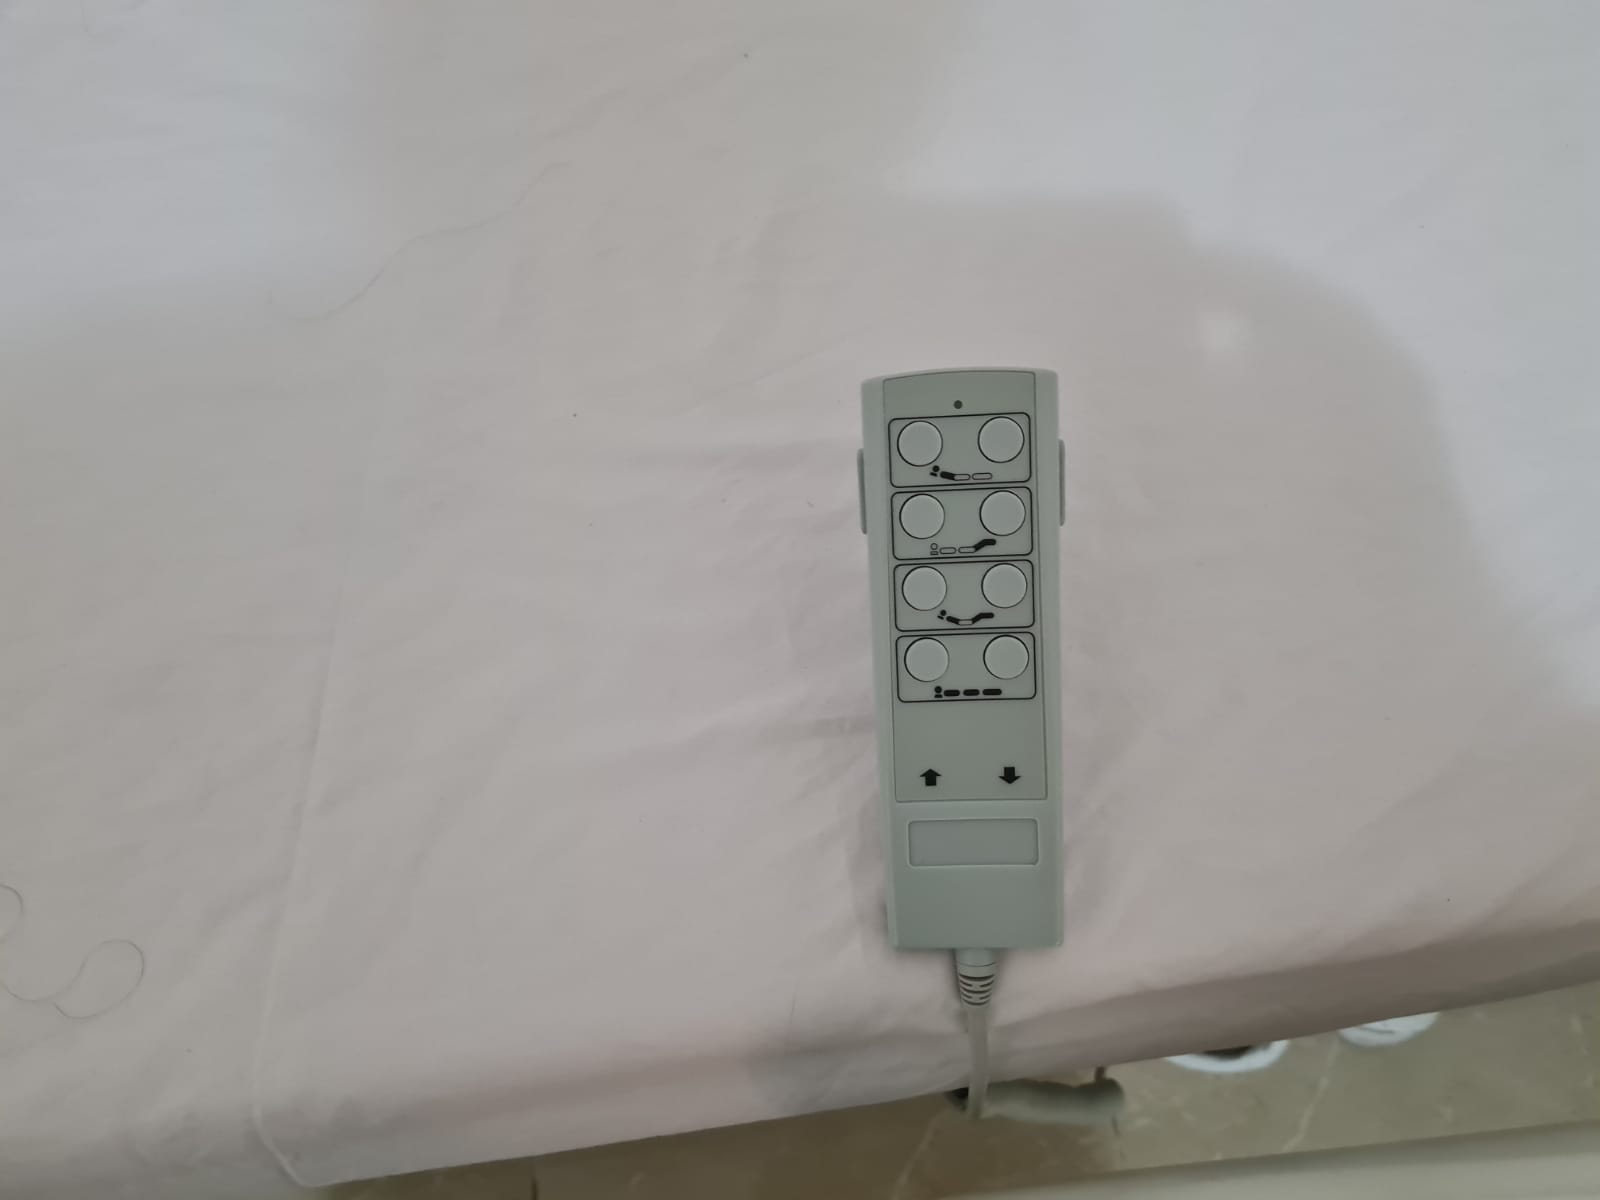 medical electric bed 